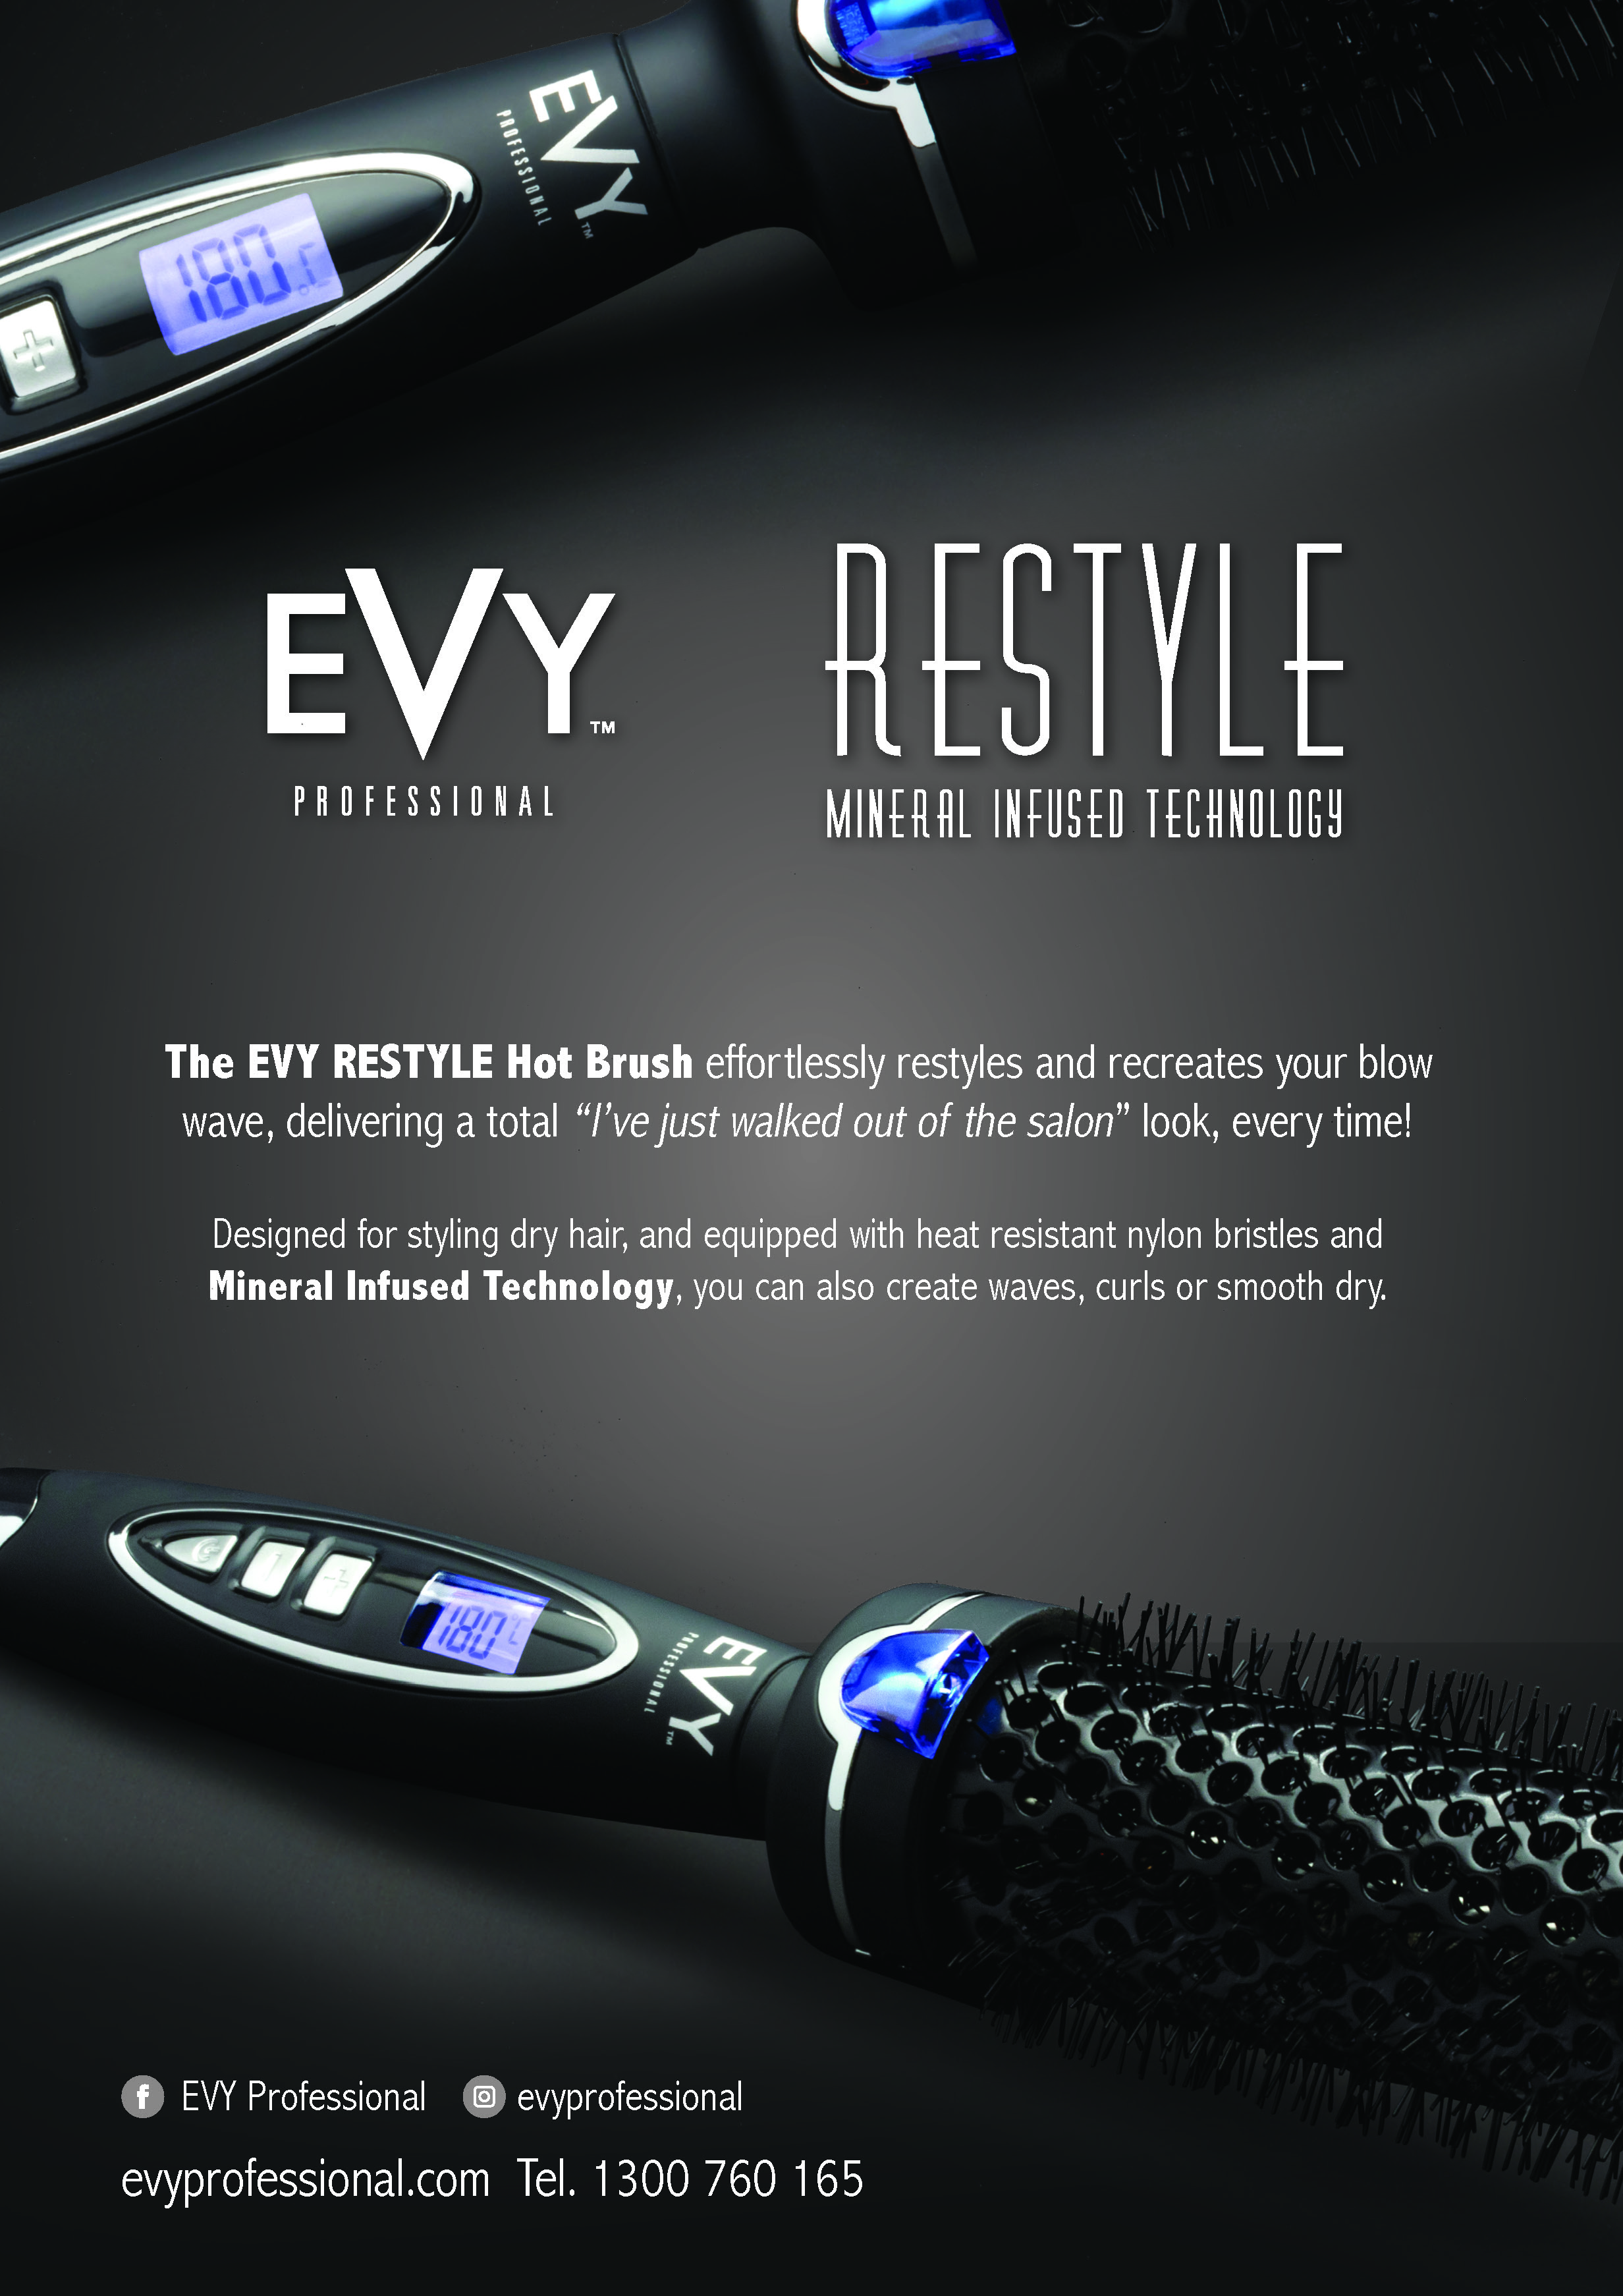 The EVY RESTYLE Hot Brush effortlessly restyles and recreates your blow wave! 2